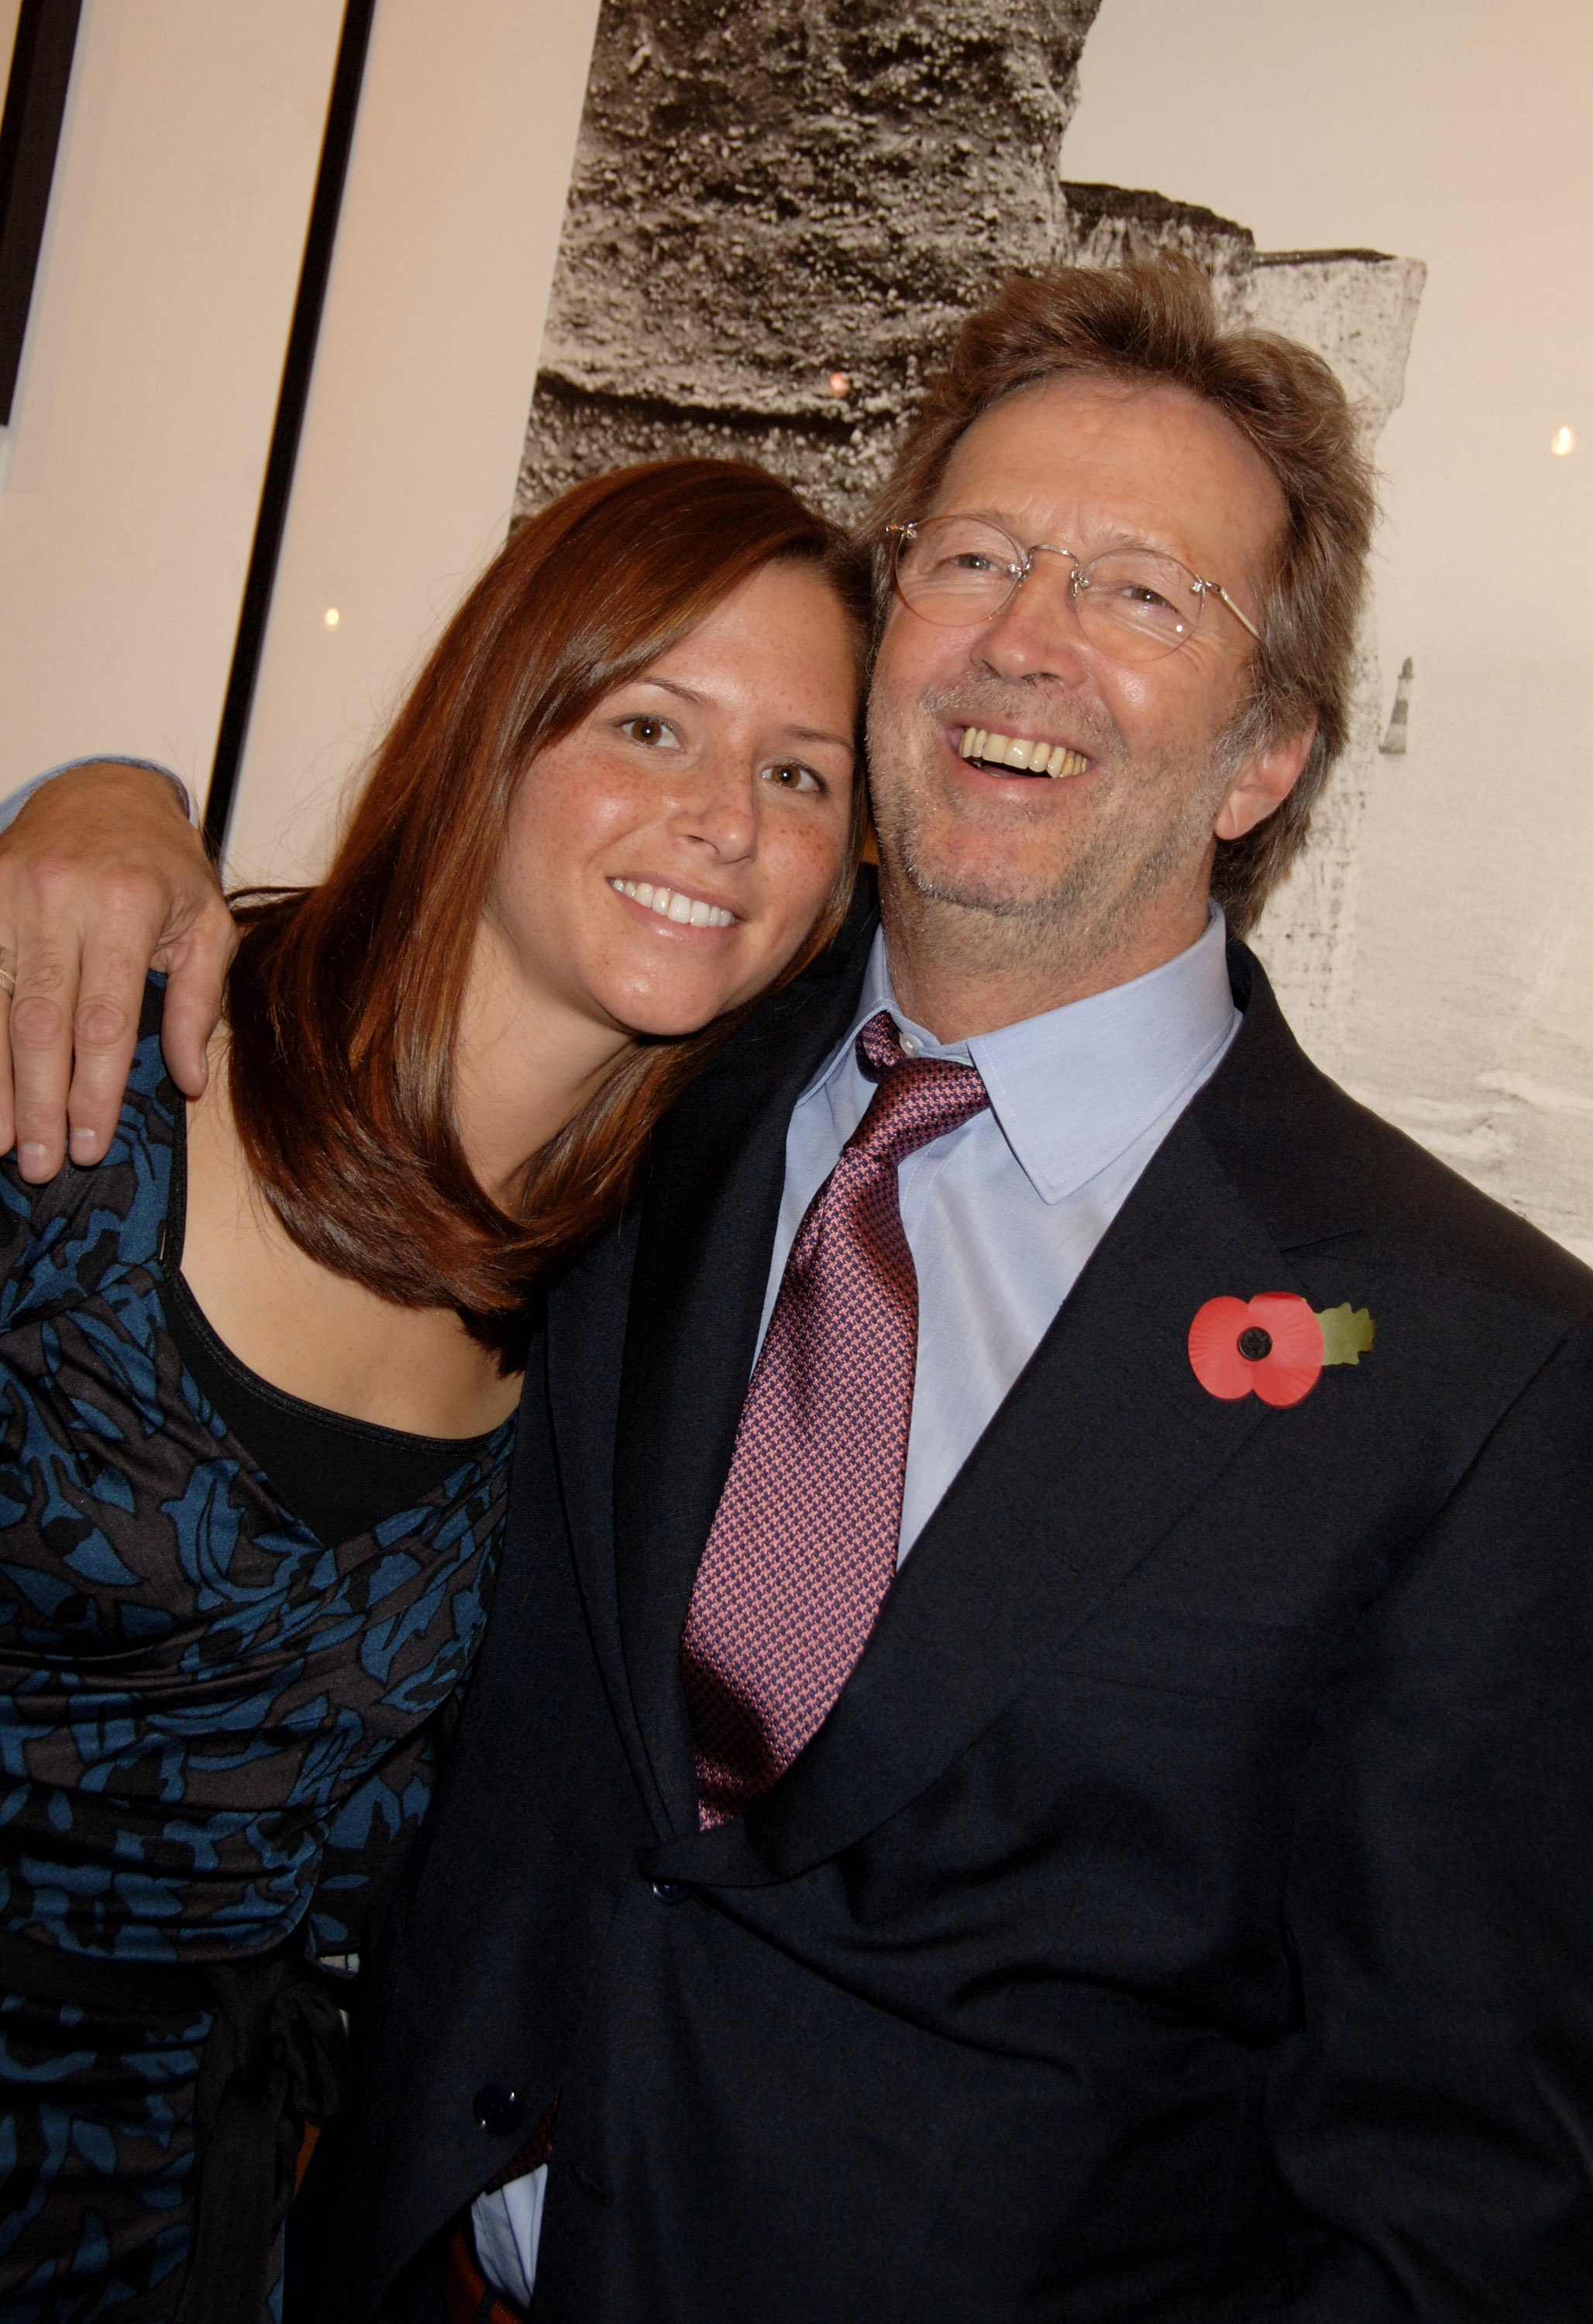 Melia McEnery Is Eric Clapton's Second Wife What We Know About Her and